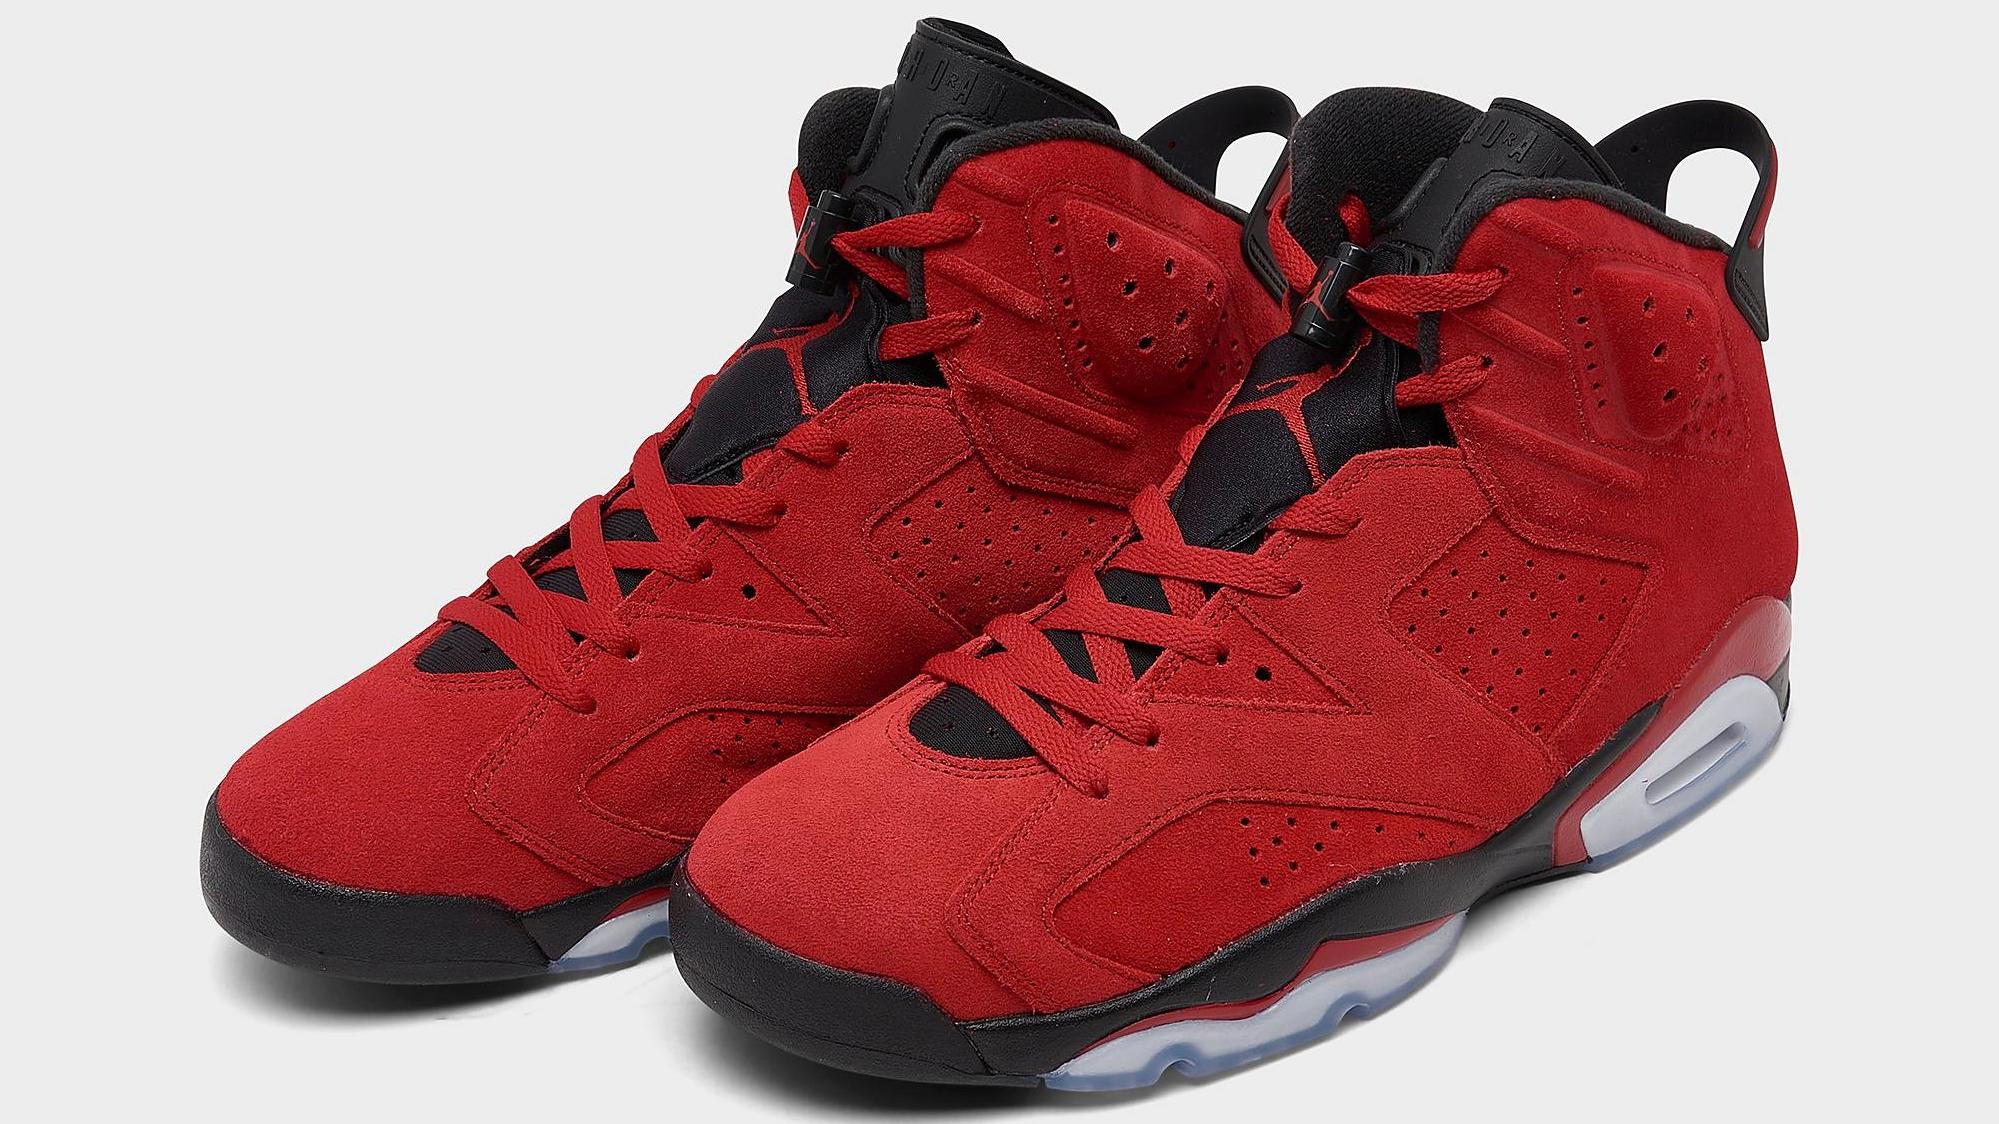 'Toro' Air Jordan 6 Release Reportedly Moved Up